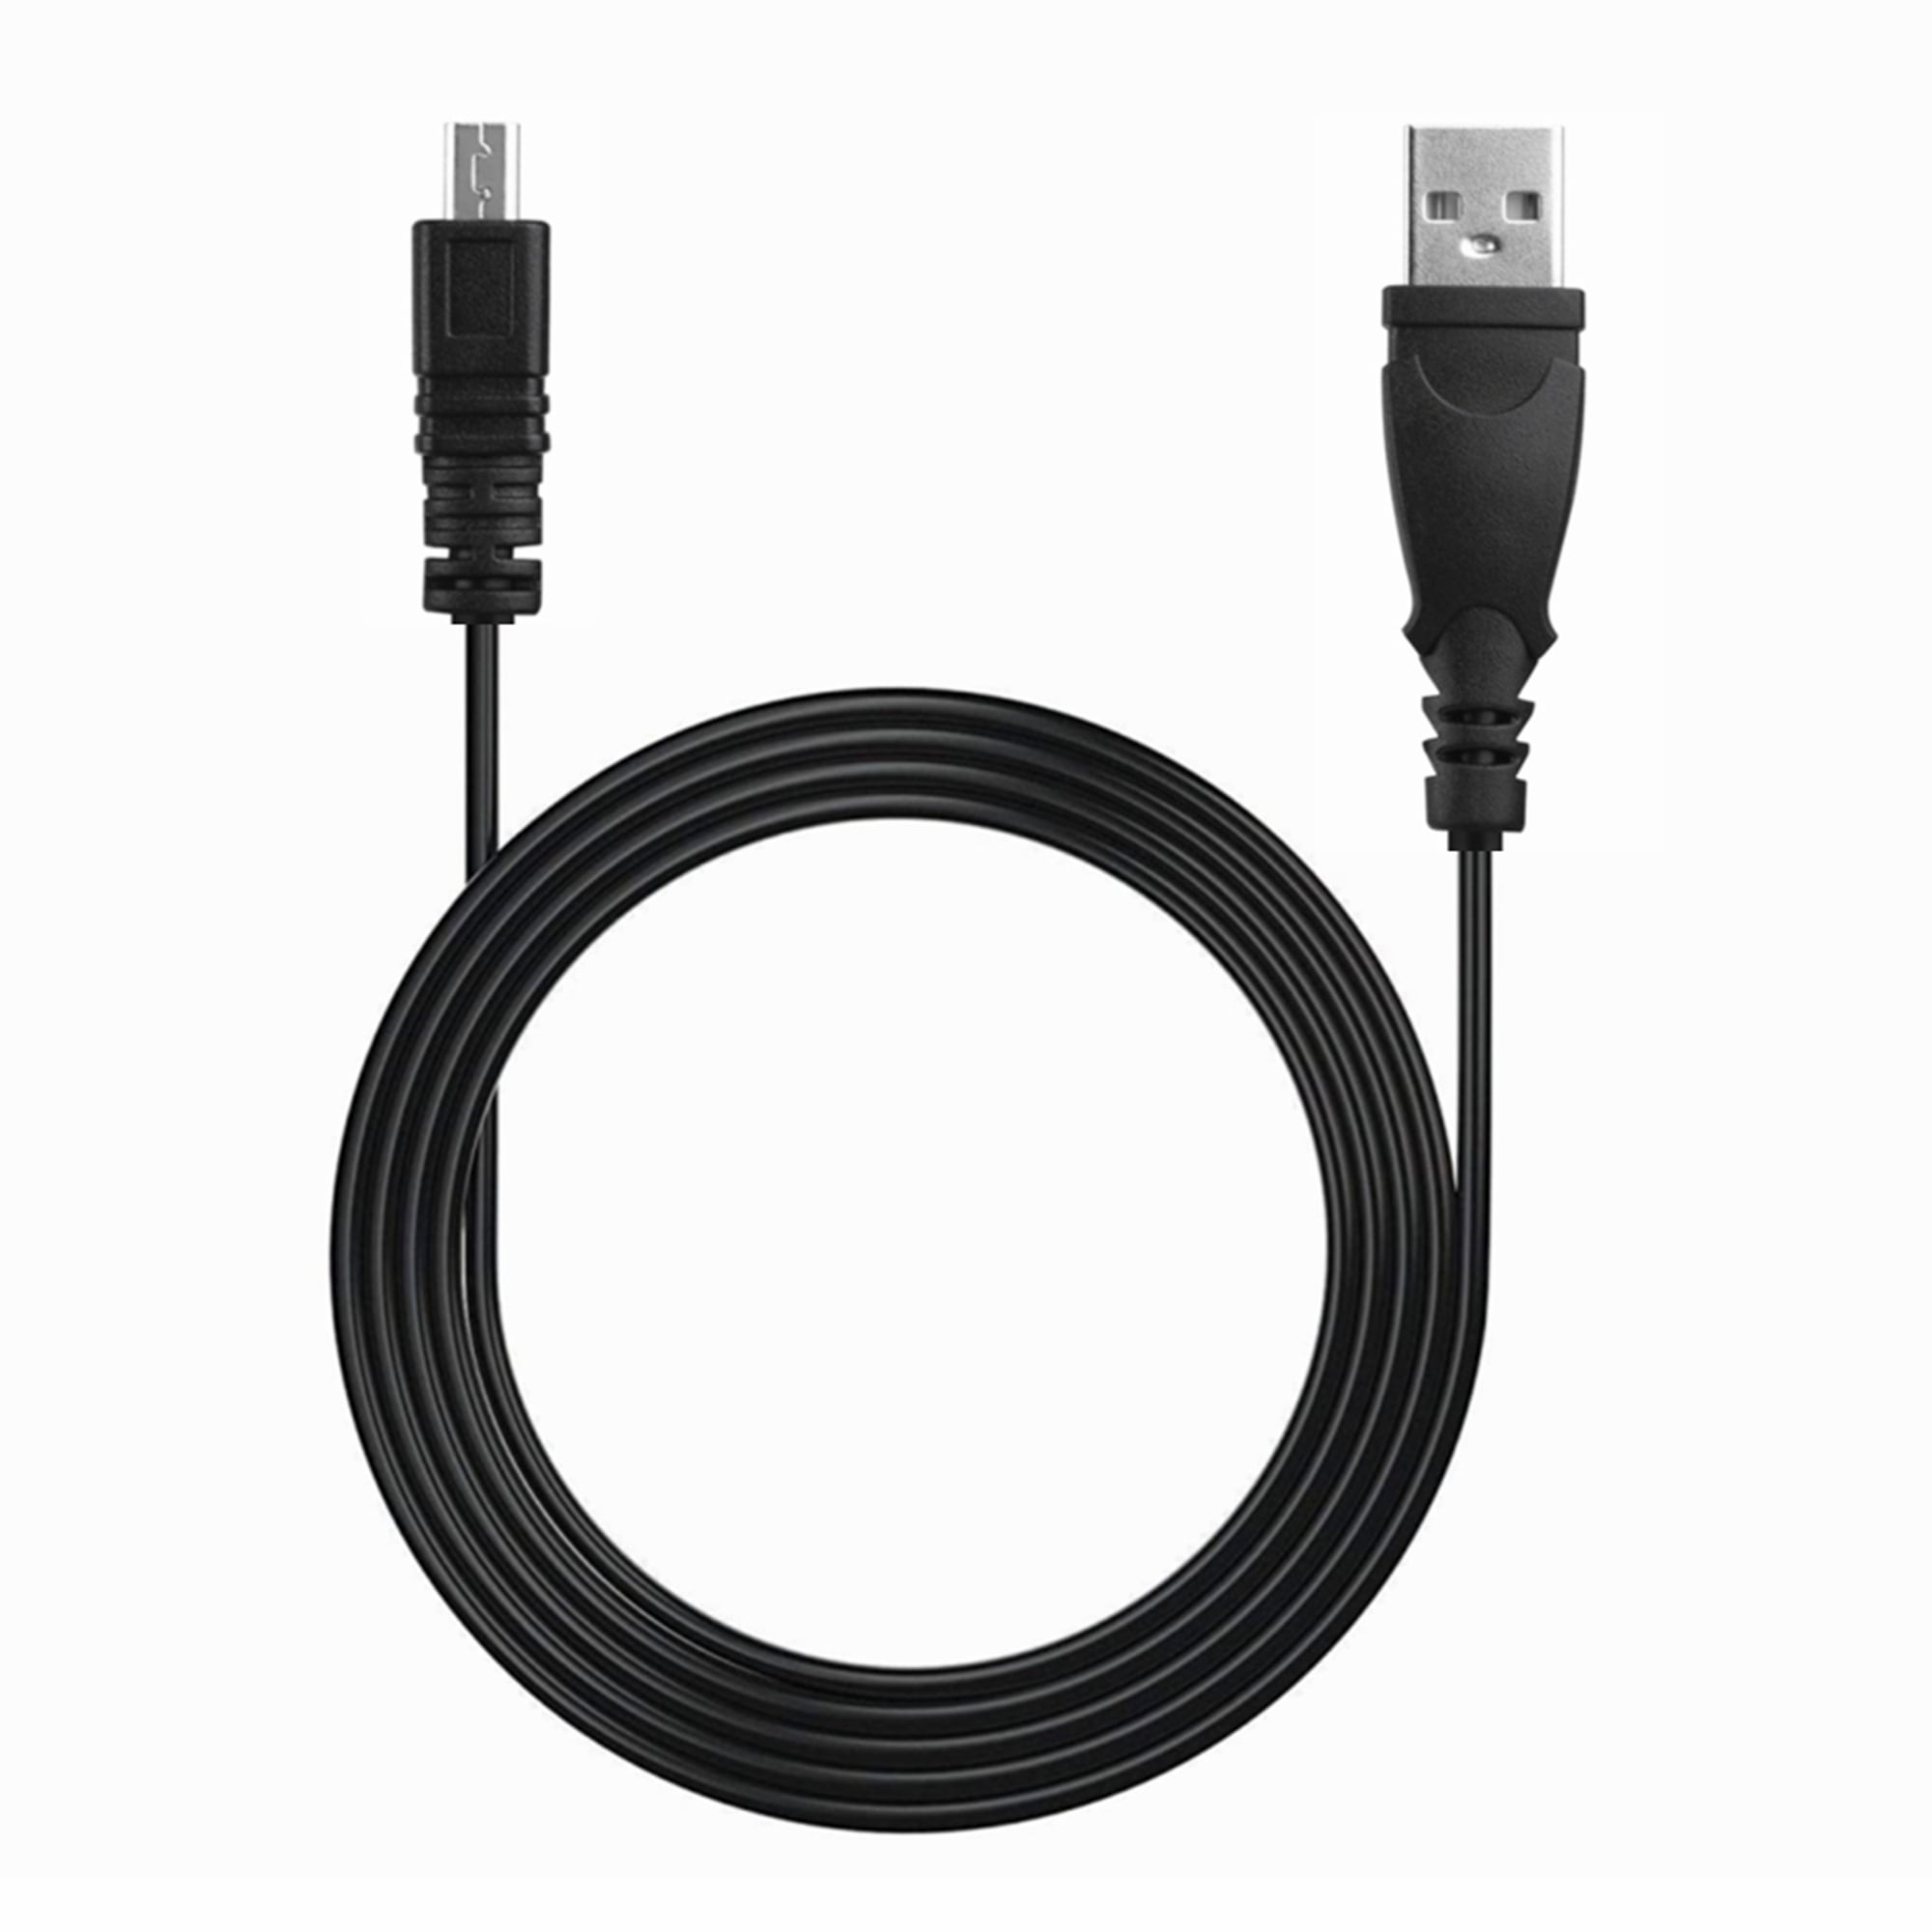 USB Data+Battery Power Charging Cable Cord Lead for Olympus camera VR-340 VR340 